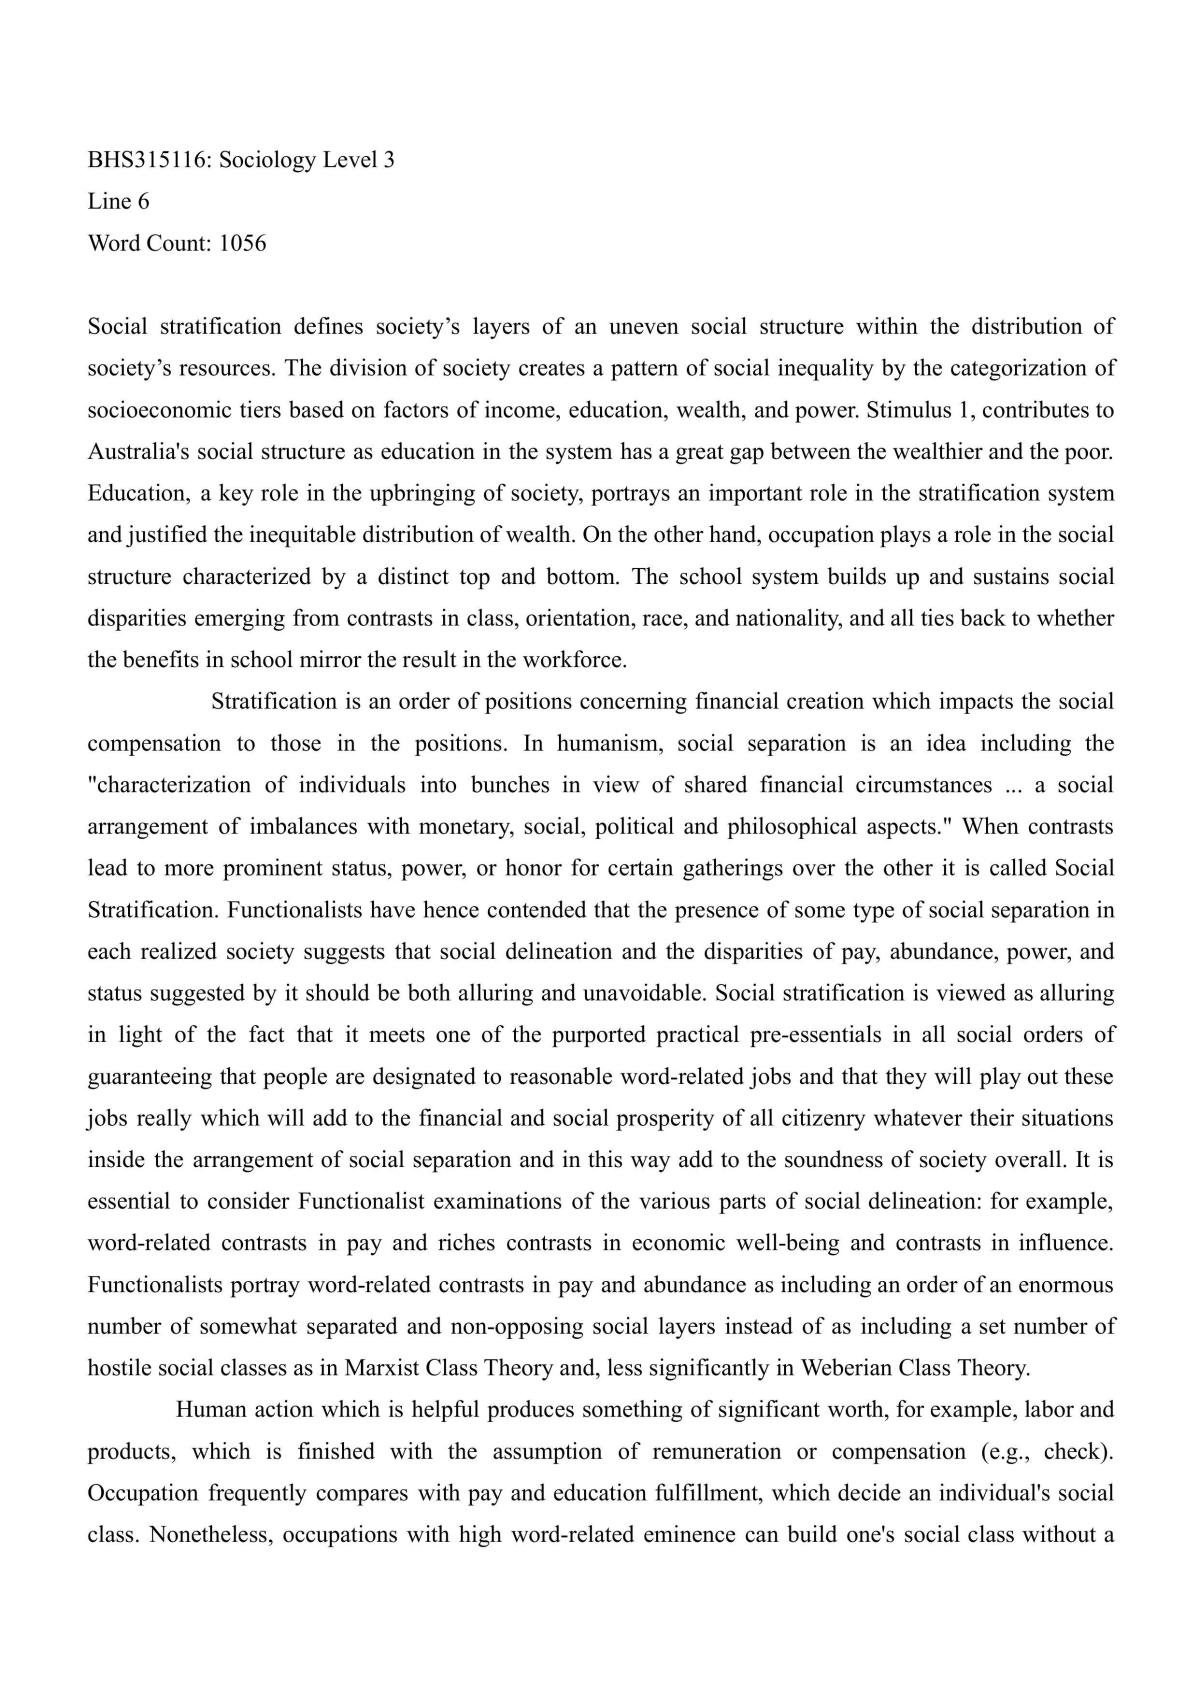 Social Stratification - Page 2